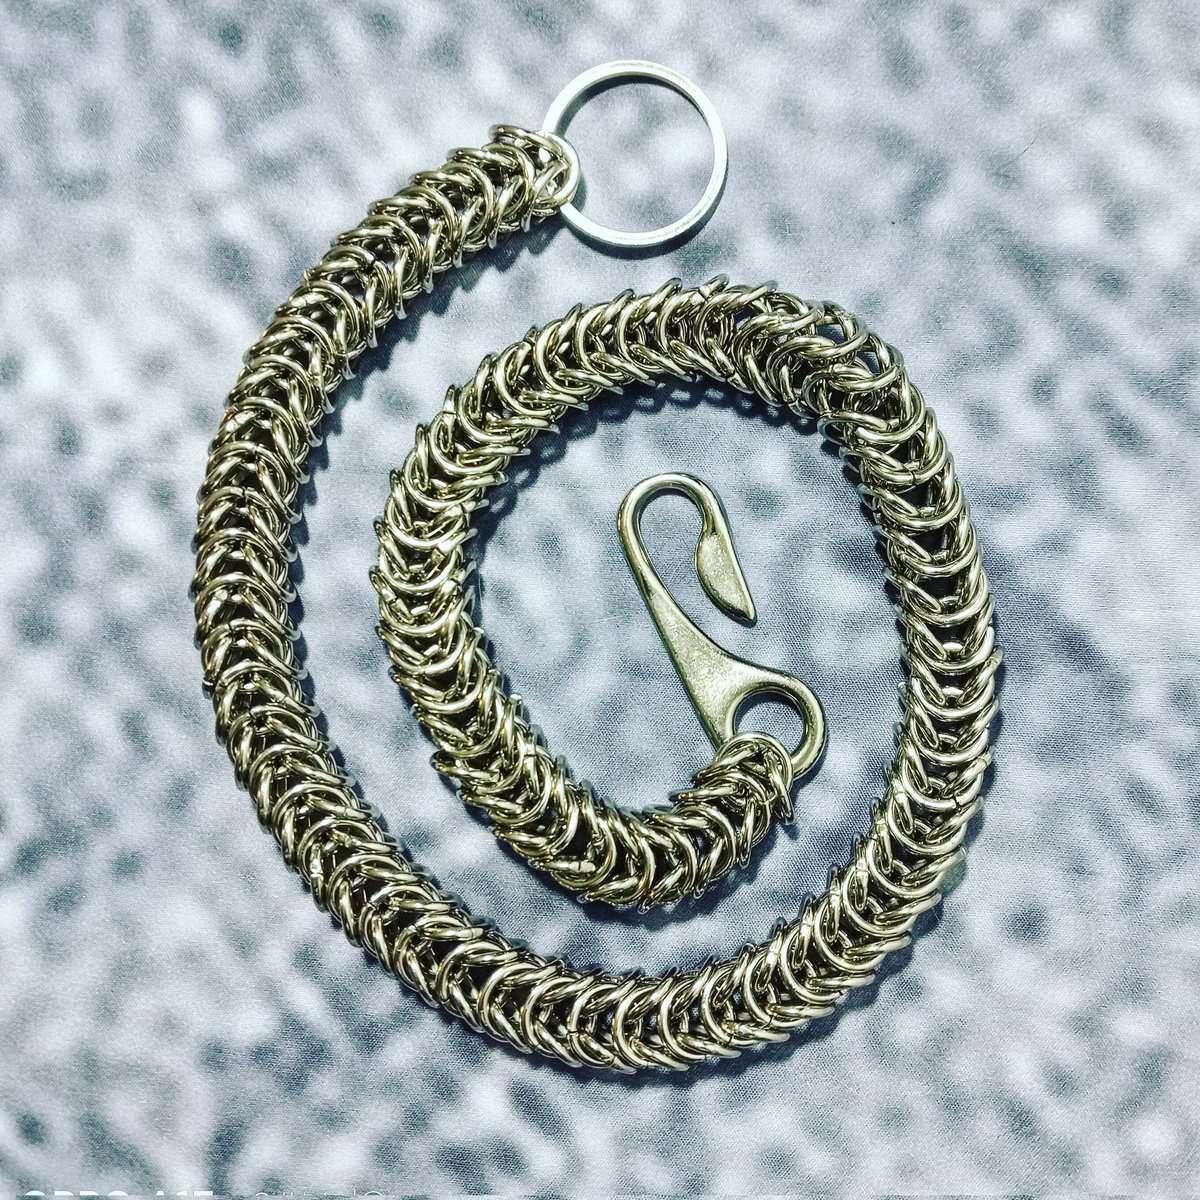 Pues se ve muy chingona.
#chainmaille #chainwallet #acero